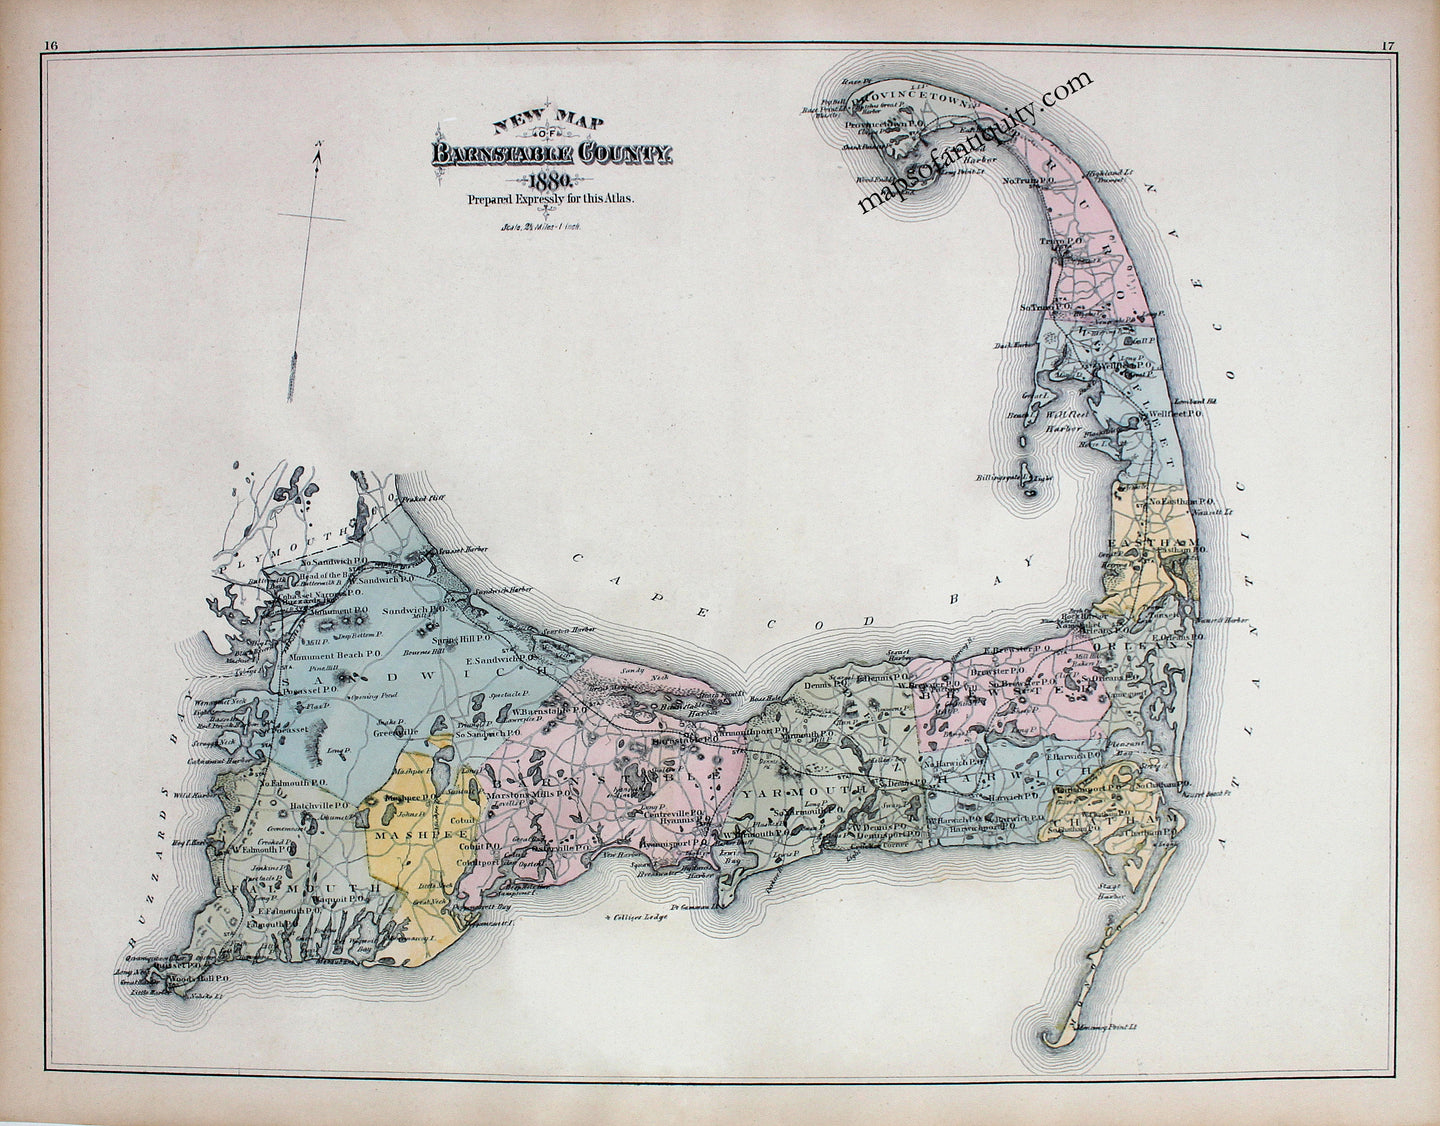 Reproduction-New-Map-of-Barnstable-County-1880---Extra-Large-Size---Reproduction-Reproductions-Cape-Cod-and-Islands-Reproduction-Walker-Maps-Of-Antiquity